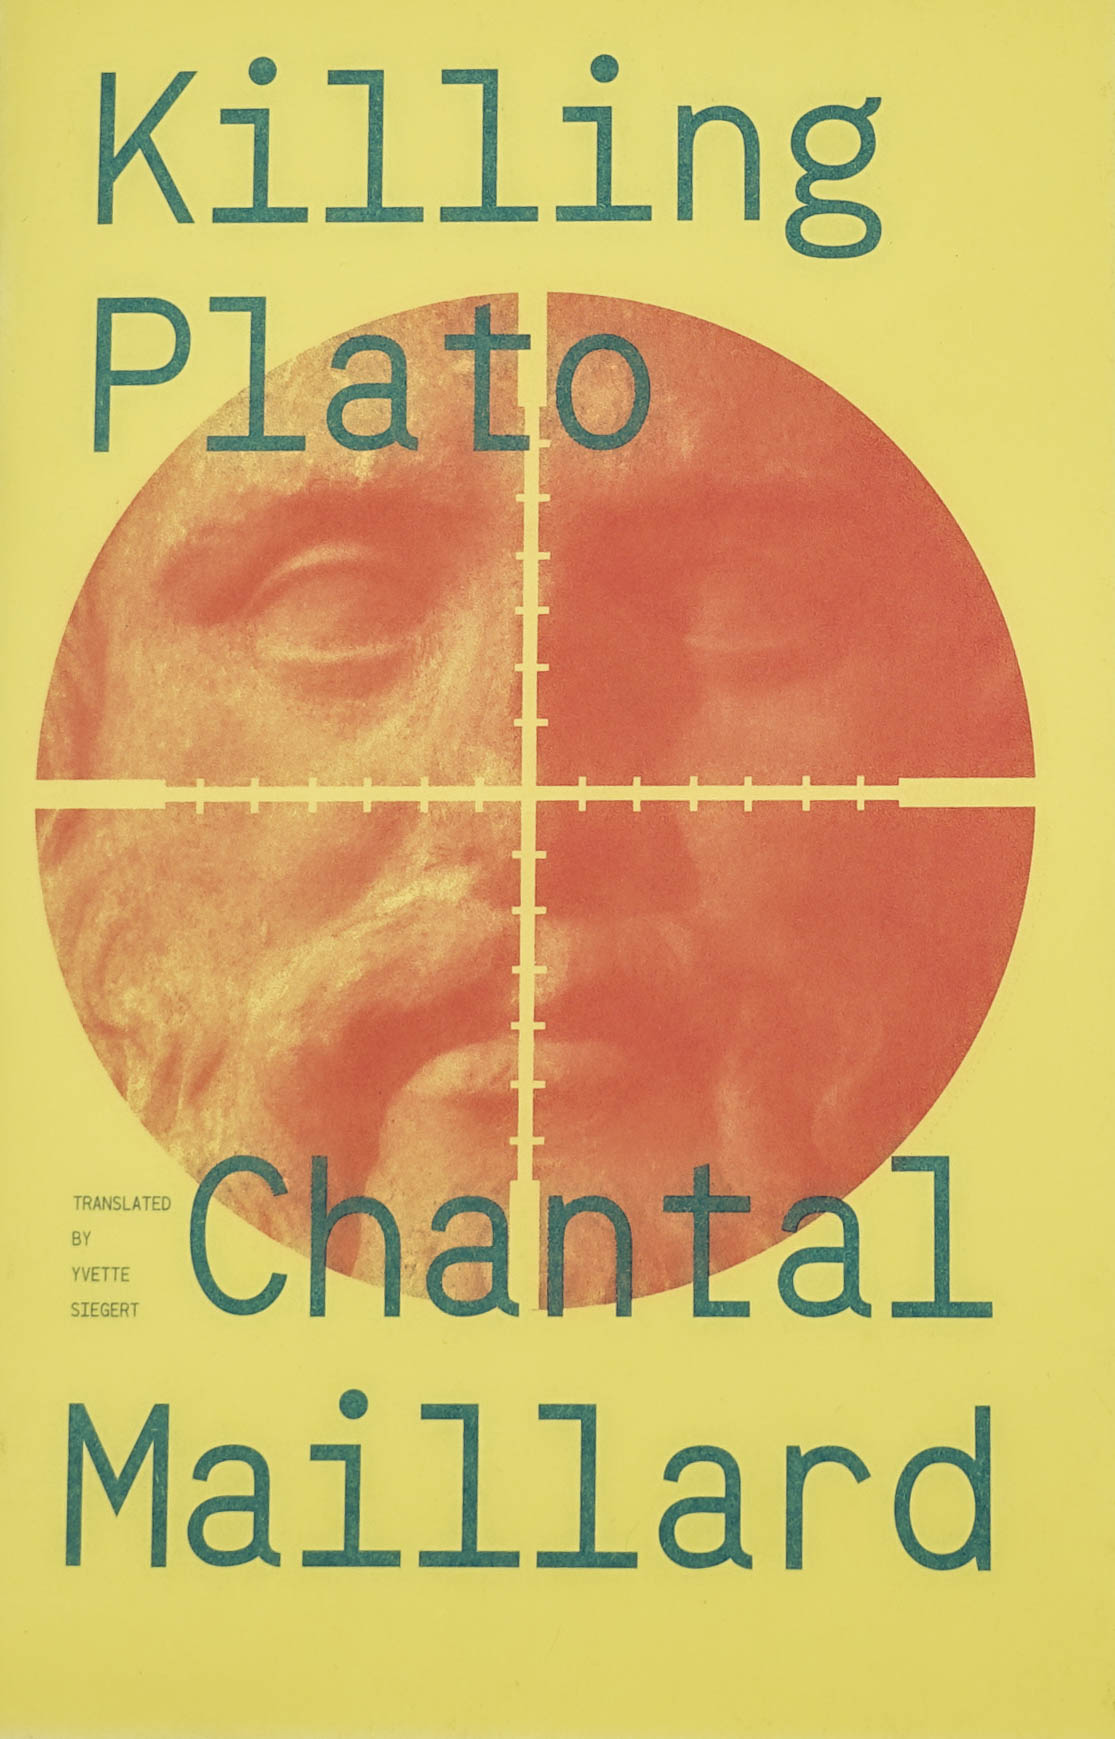 Book cover in a pale yellow. In the center there is a grainy pink image of a greek statue (ostensibly Plato) with crosshairs of a gun scope superimposed over. At the top, in blue font, the title "Killing Plato" is written, and near the bottom the author's name, Chantal Maillard, is written.